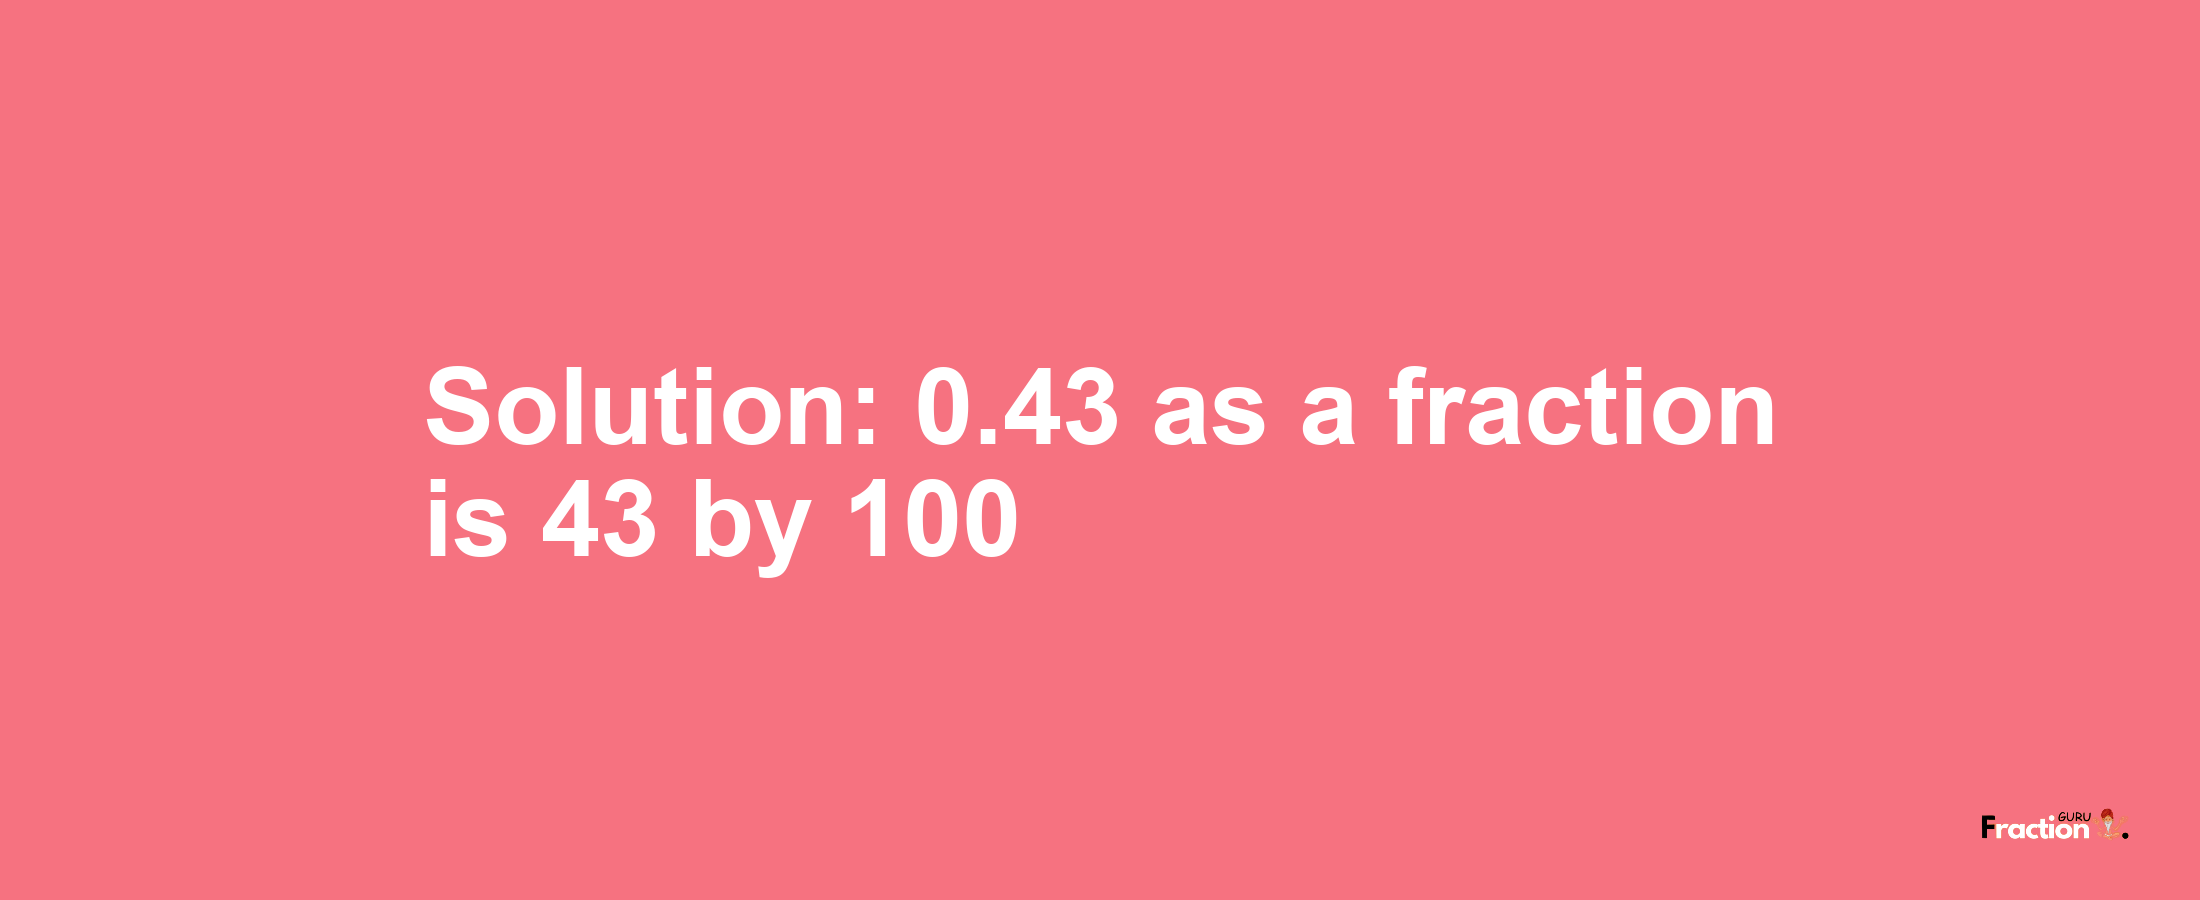 Solution:0.43 as a fraction is 43/100